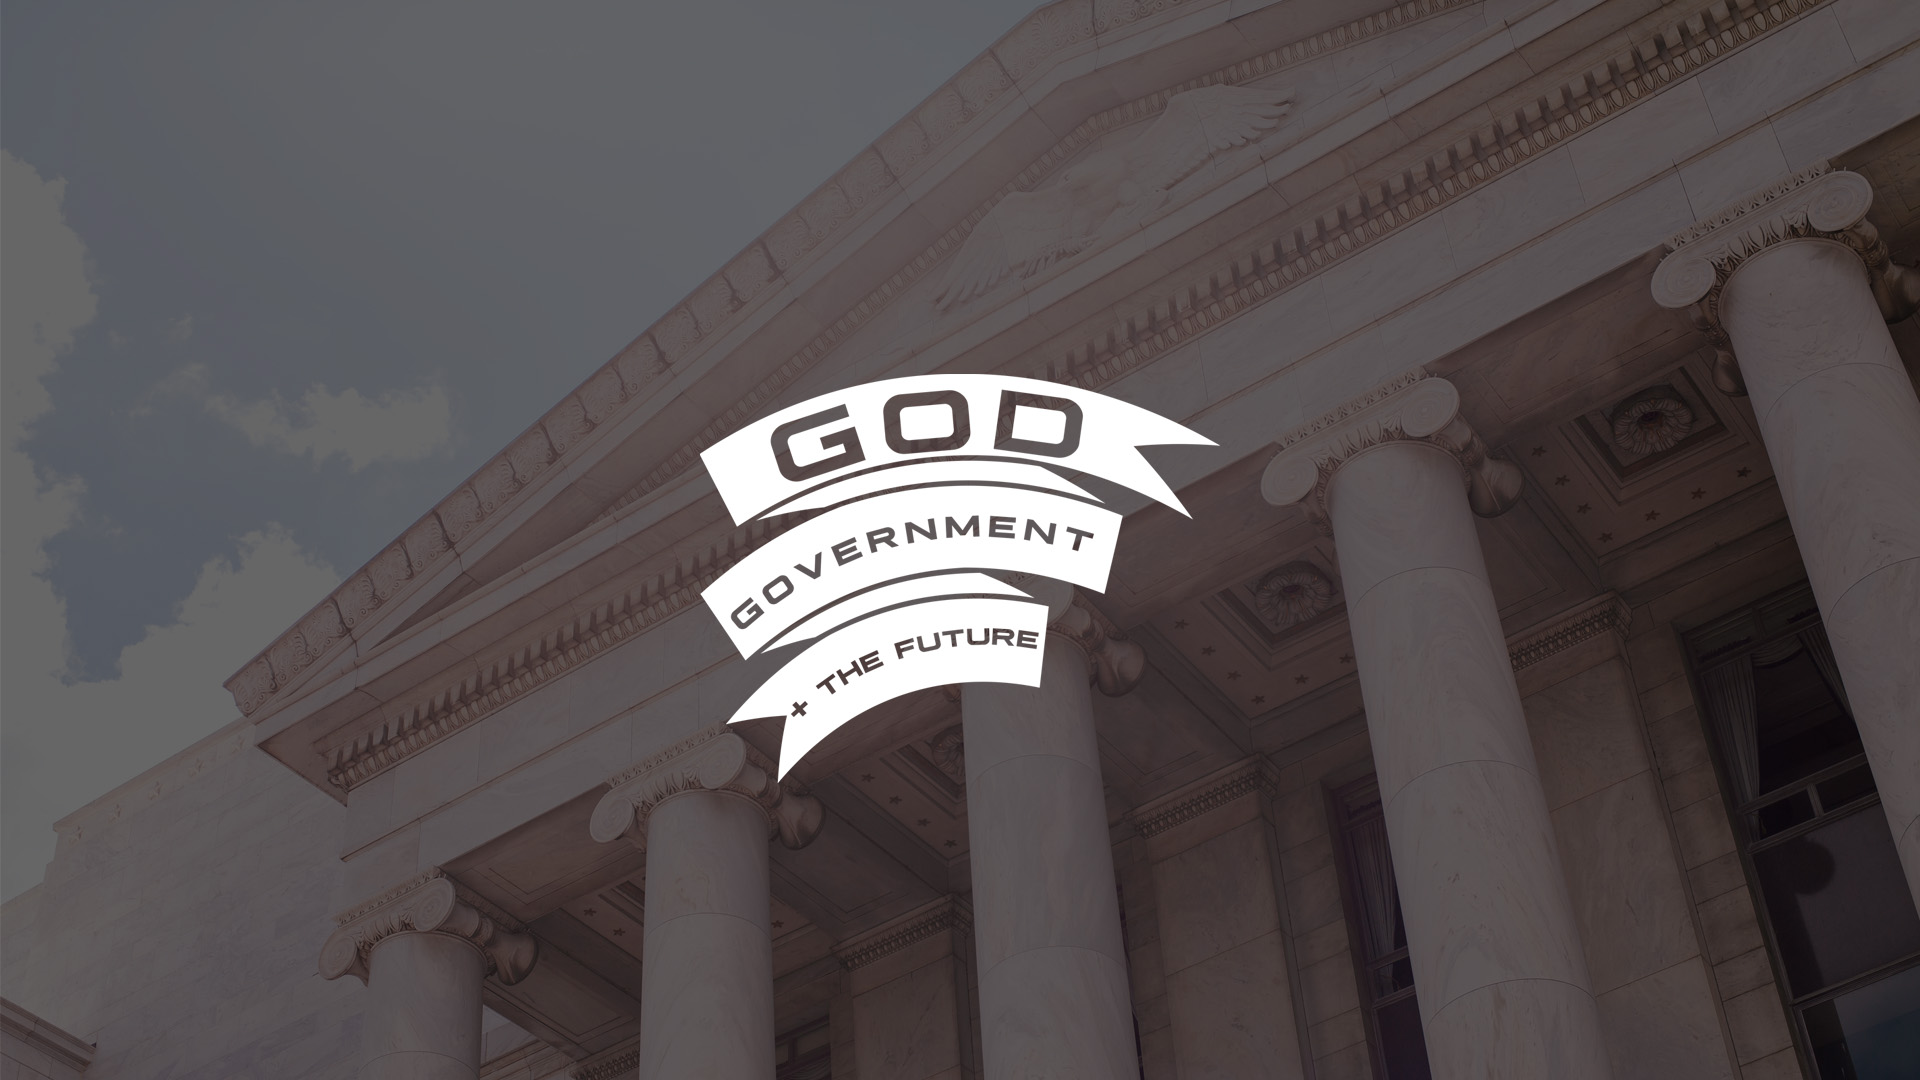 GOD, GOVERNMENT, AND THE FUTURE